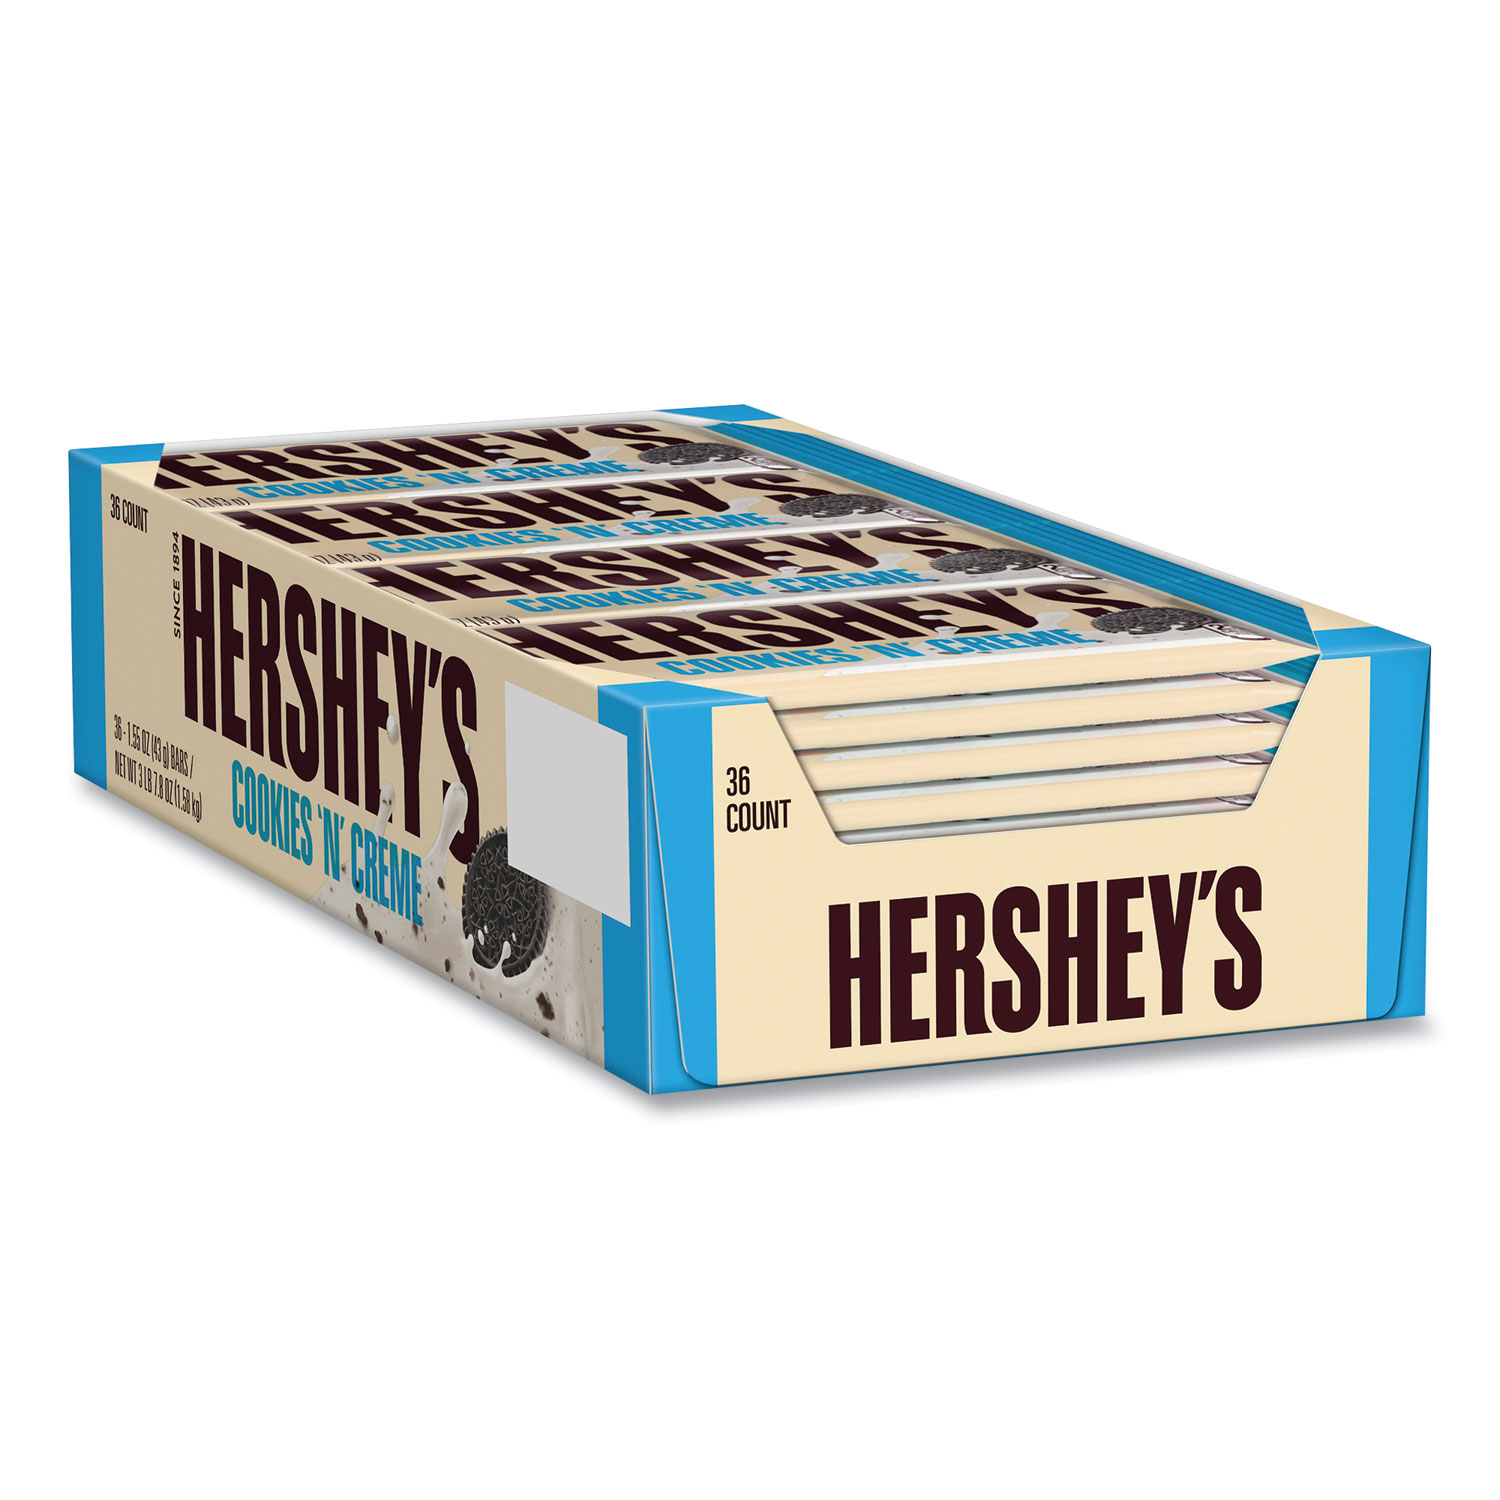  Hershey's 23900 Cookies 'n' Creme Candy Bar, 1.55 oz Bar, 36 Bars/Carton, Free Delivery in 1-4 Business Days (GRR20900965) 